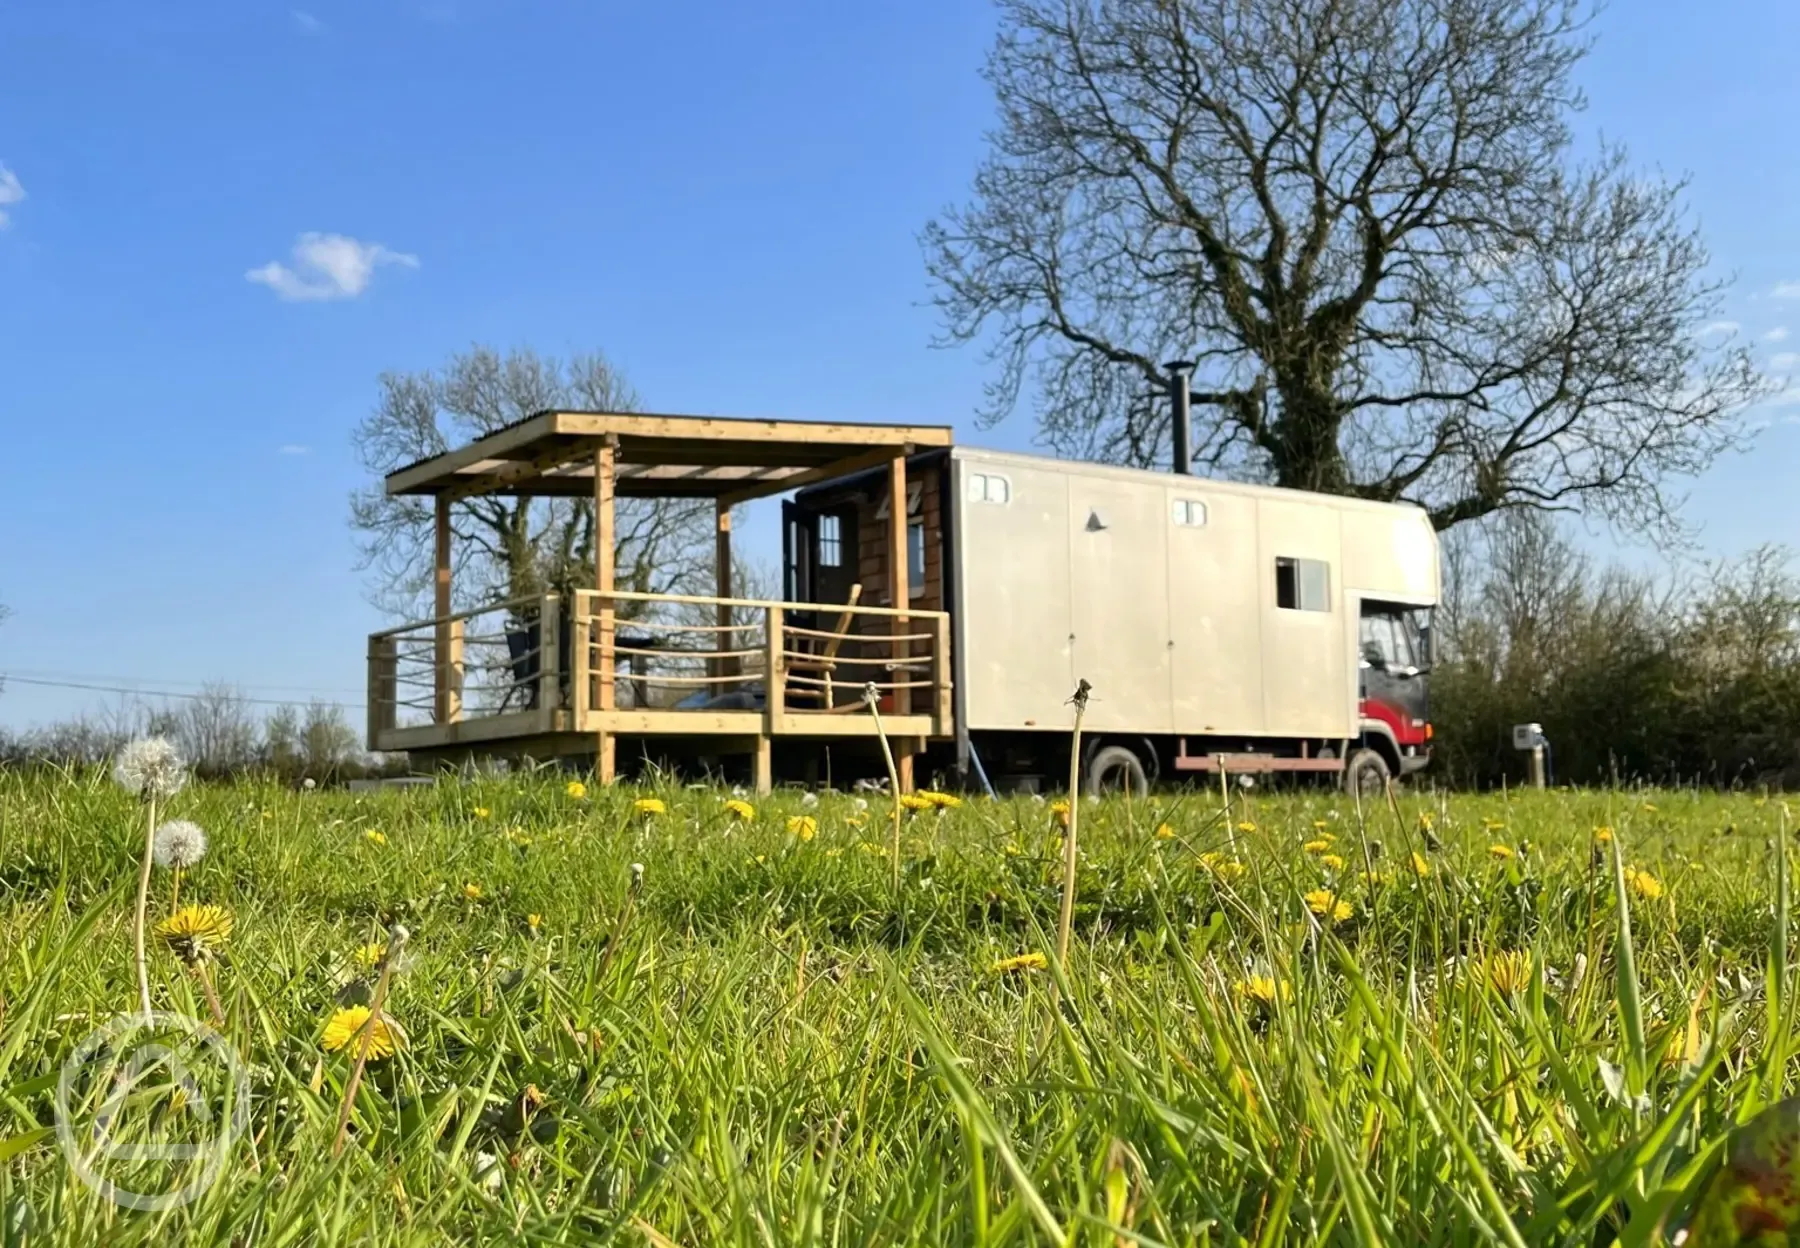 Outside view of Horse lorry.